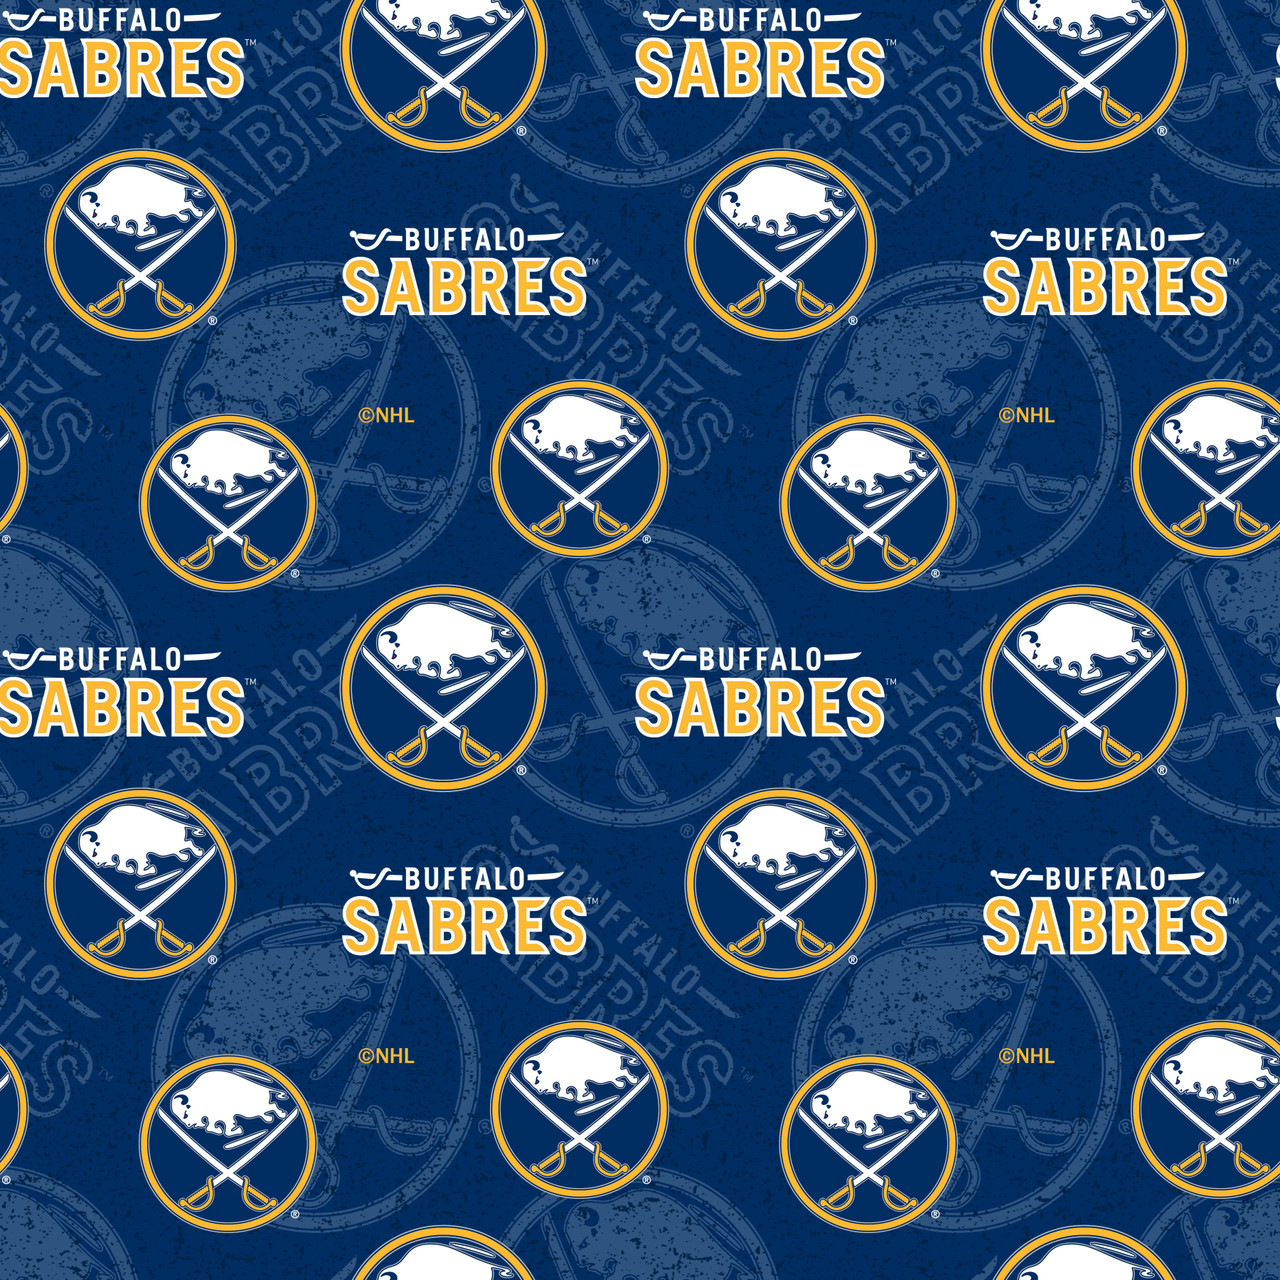 Buffalo Sabers Cotton Fabric with Tone on Tone Print and Matching Solid Cotton Fabrics